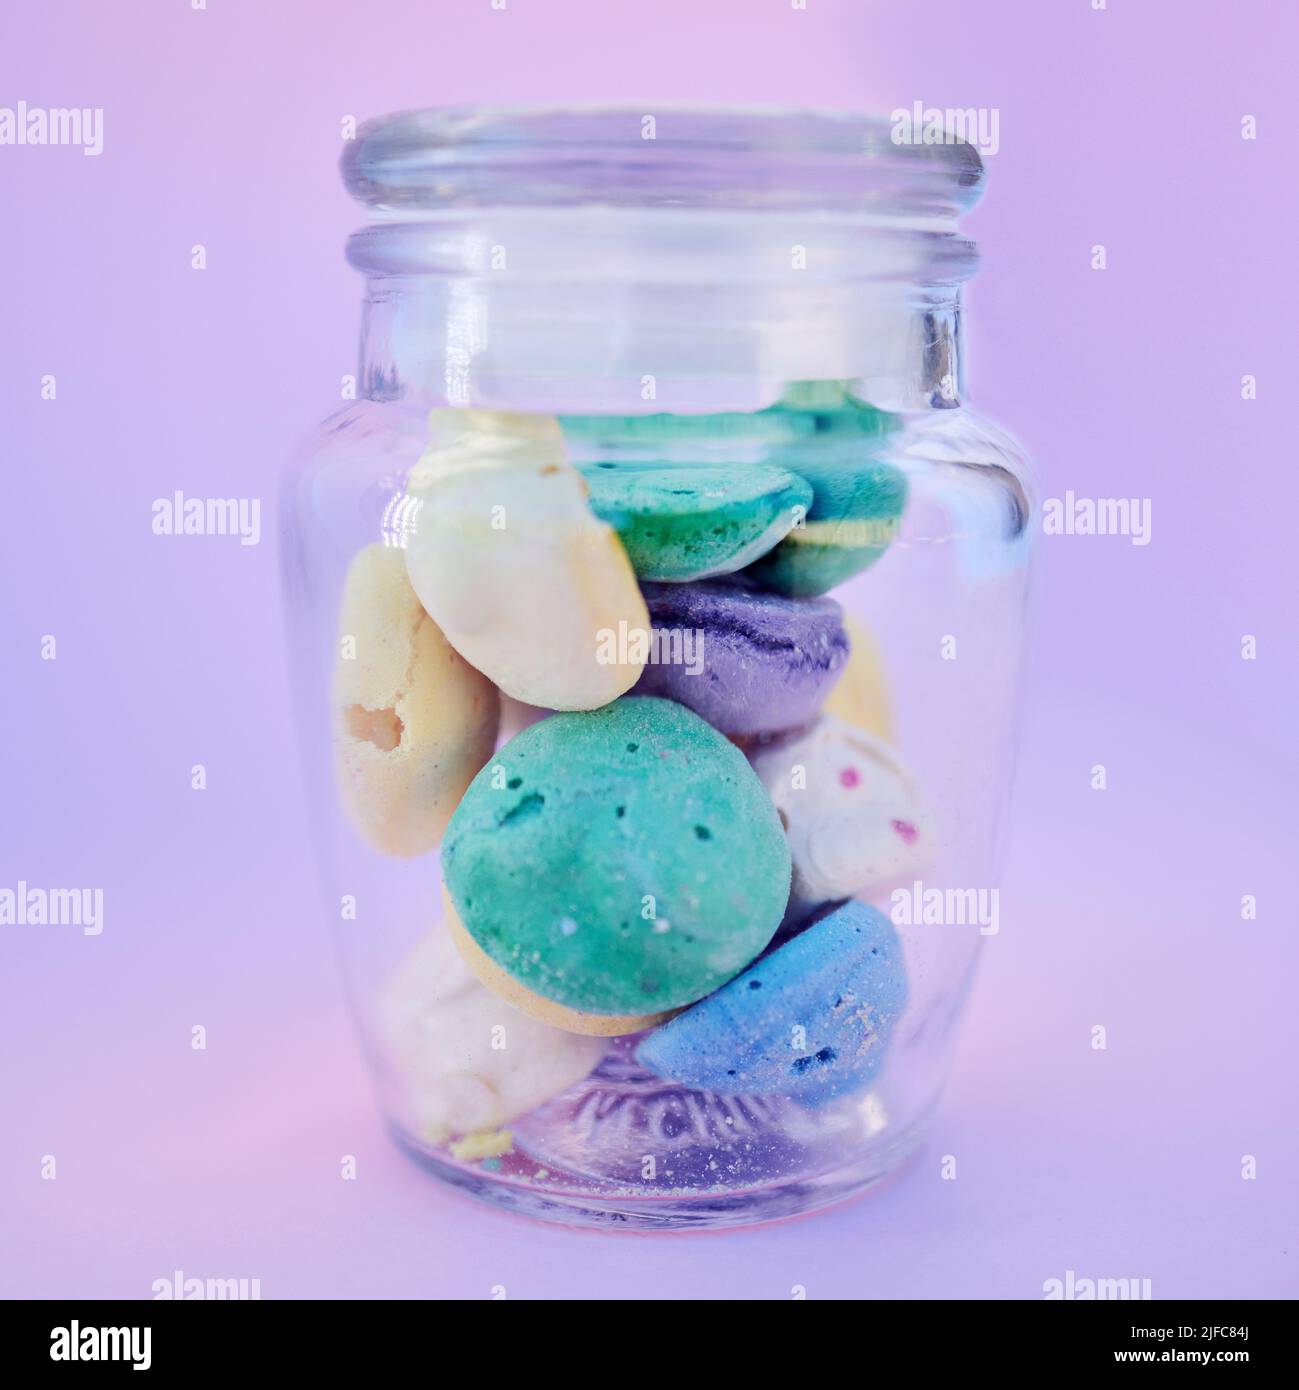 https://c8.alamy.com/comp/2JFC84J/a-closeup-of-a-glass-jar-filled-with-a-variety-of-colourful-painted-little-beach-stones-isolated-against-a-purple-background-a-good-little-concept-of-2JFC84J.jpg